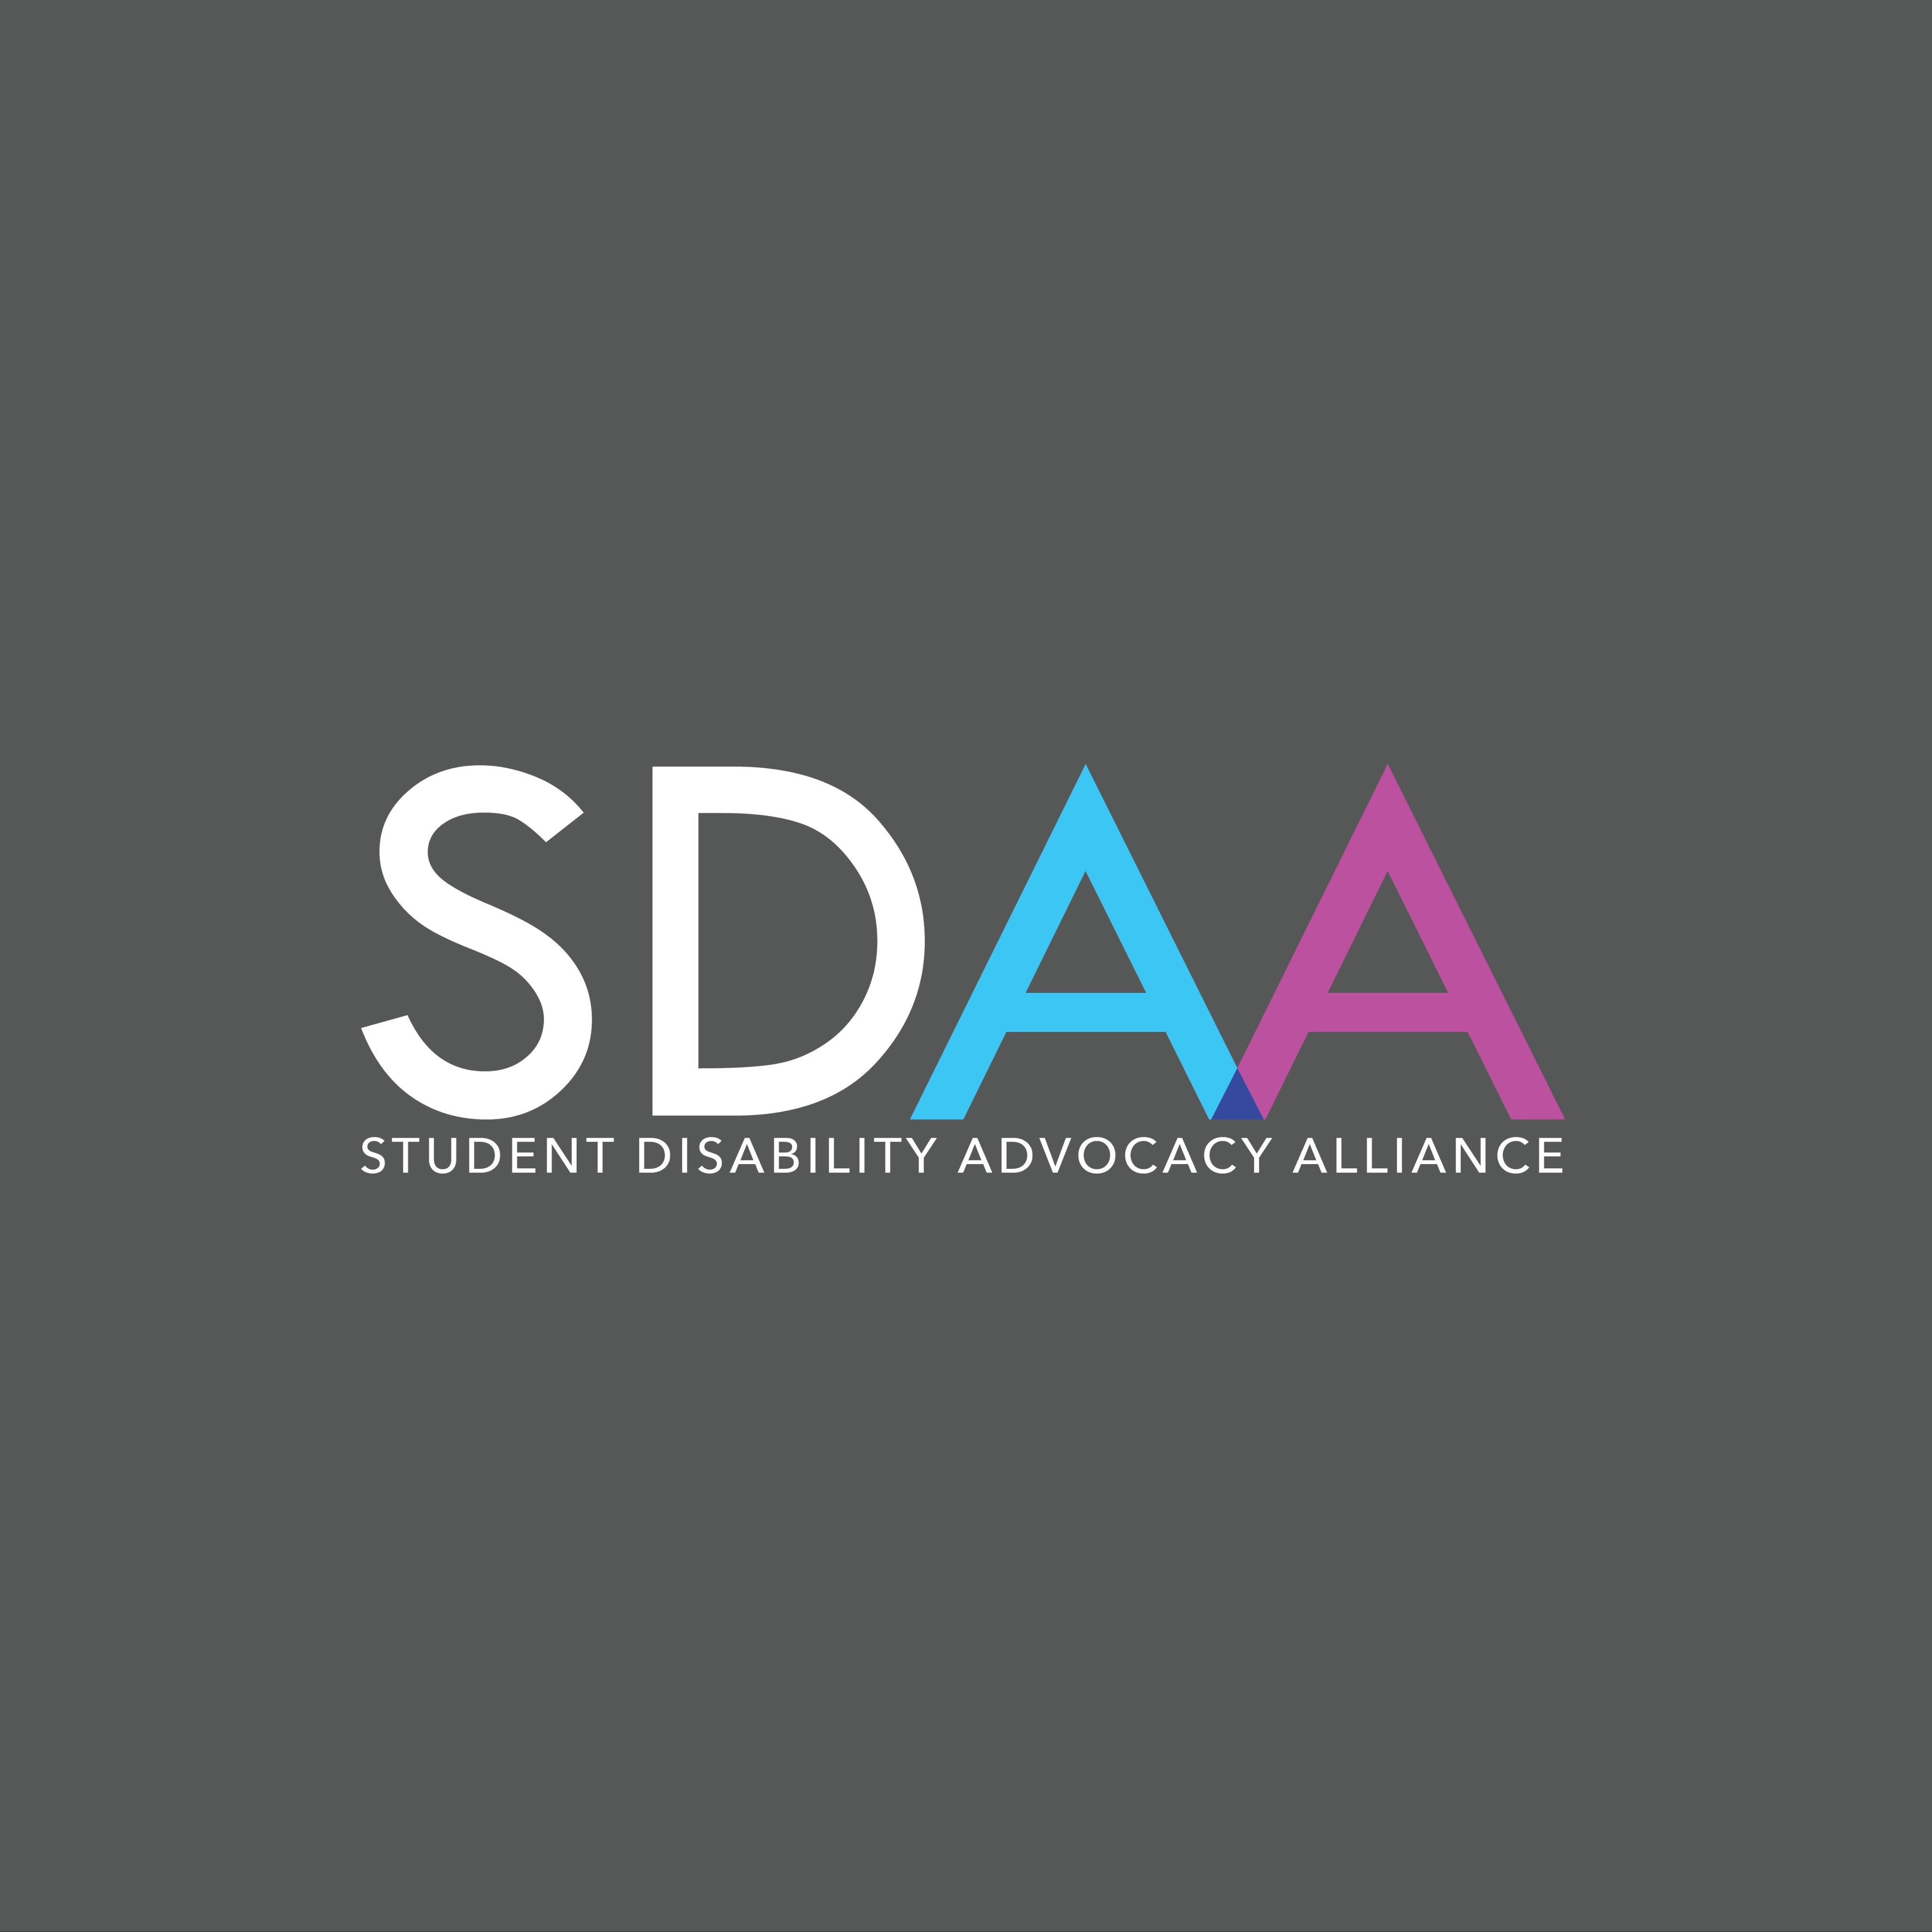 The Student Disability Advocacy Alliance